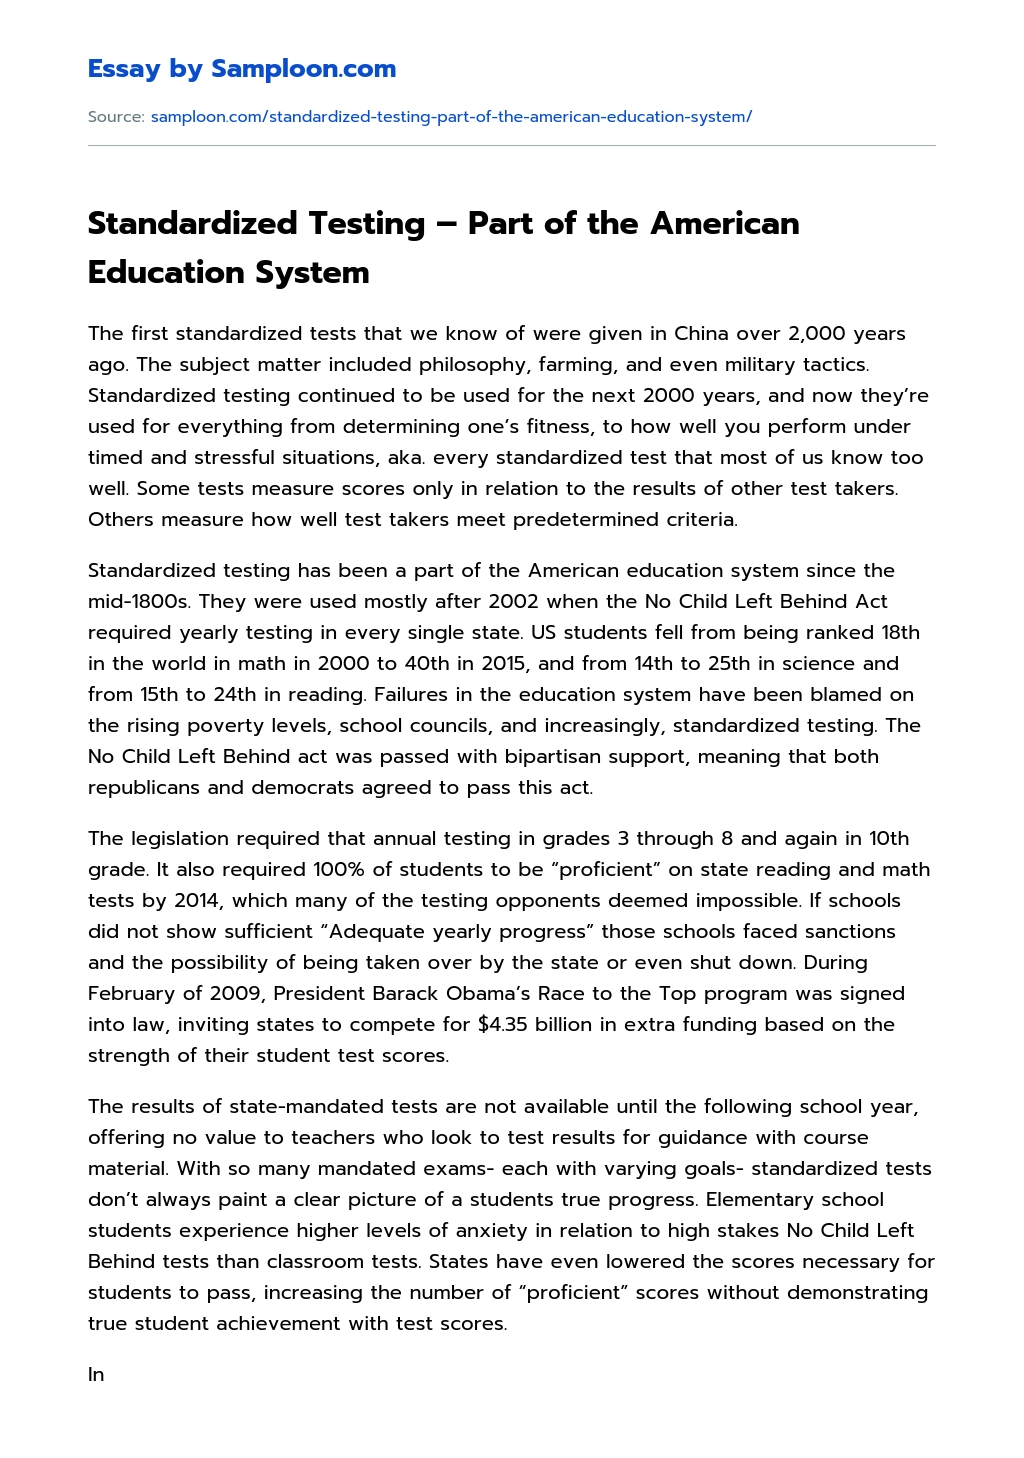 Standardized Testing – Part of the American Education System essay